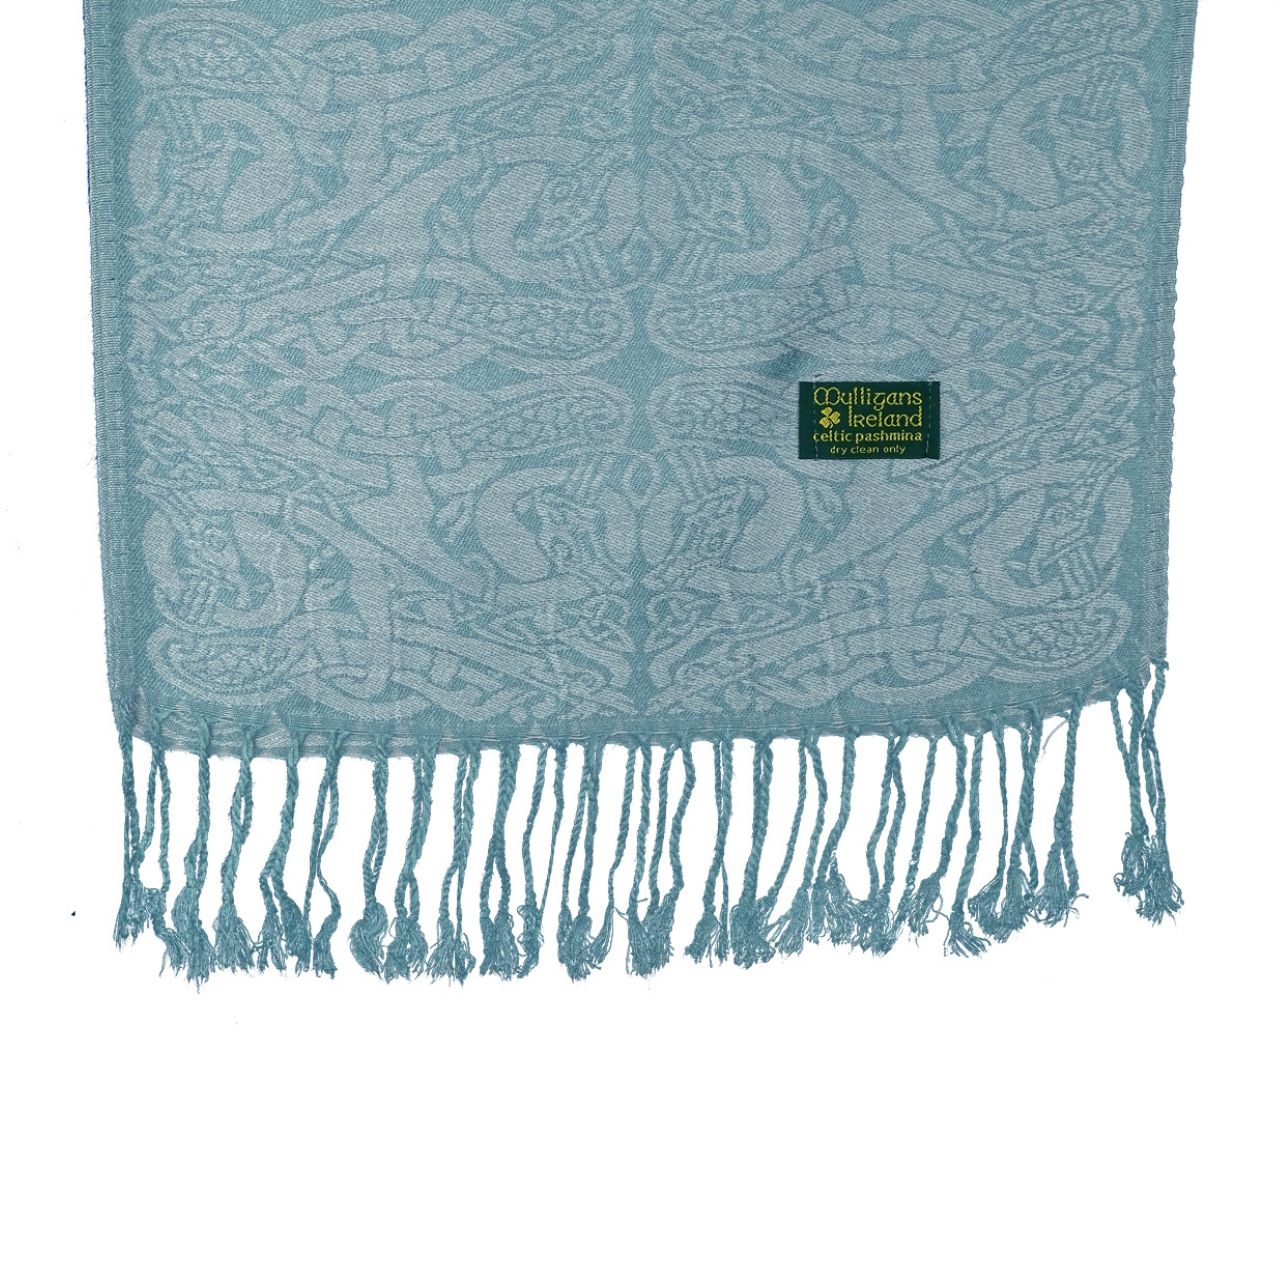 Mulligans Ireland Inishtrahull Celtic Pashmina Scarf  Named after the islands of Ireland, and inspired by their stories and history, our Island Range of shawls and scarves is a fusion of modern Irish design and colour palette together with the traditional Celtic knot weave or ‘snaidhm celtic’ in Irish/Gaelic.